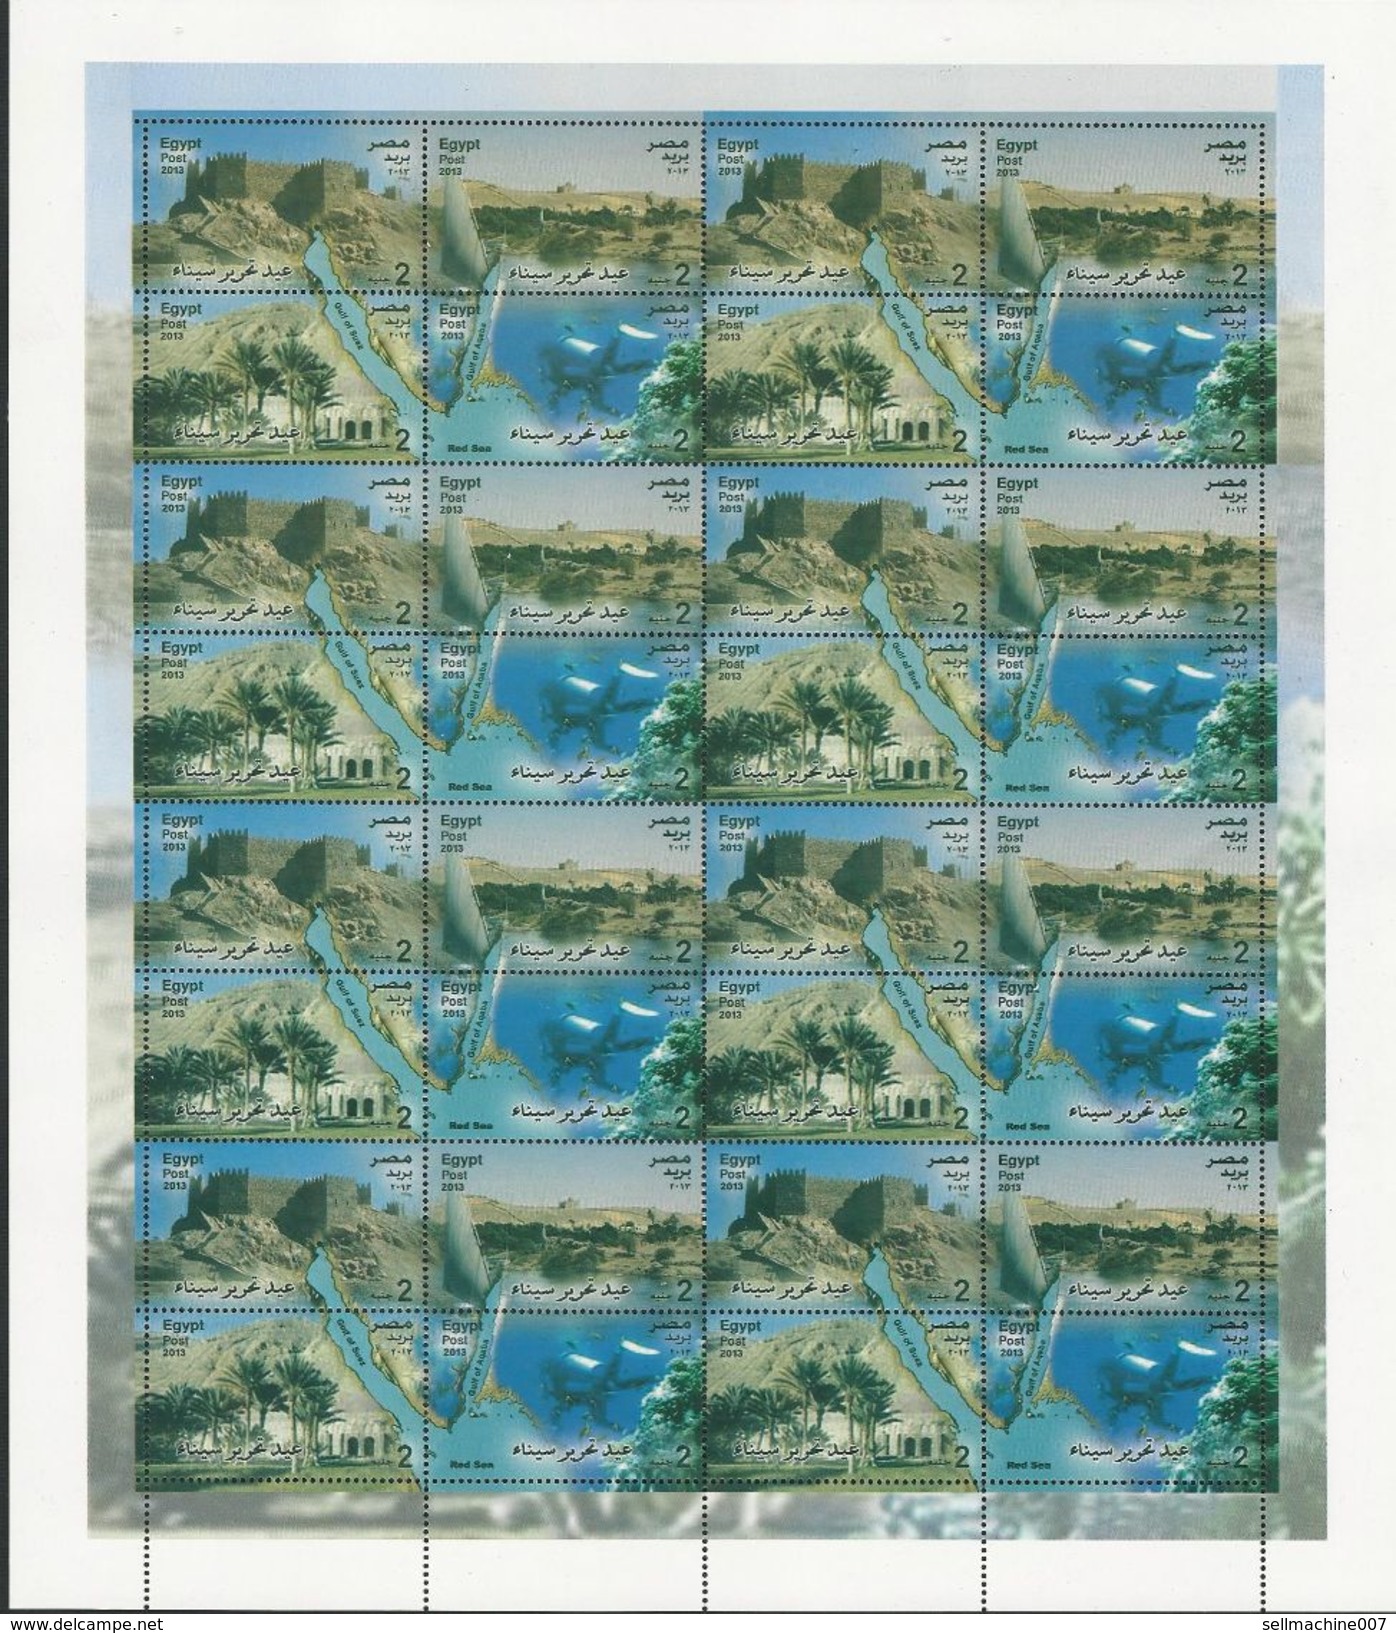 EGYPT 2013 Full Sheet Sinai Liberation Day 32 Stamps 8 Sets X 4 Stamp MNH X 2 POUND - Nile Monuments Divers Palm Trees - Ongebruikt